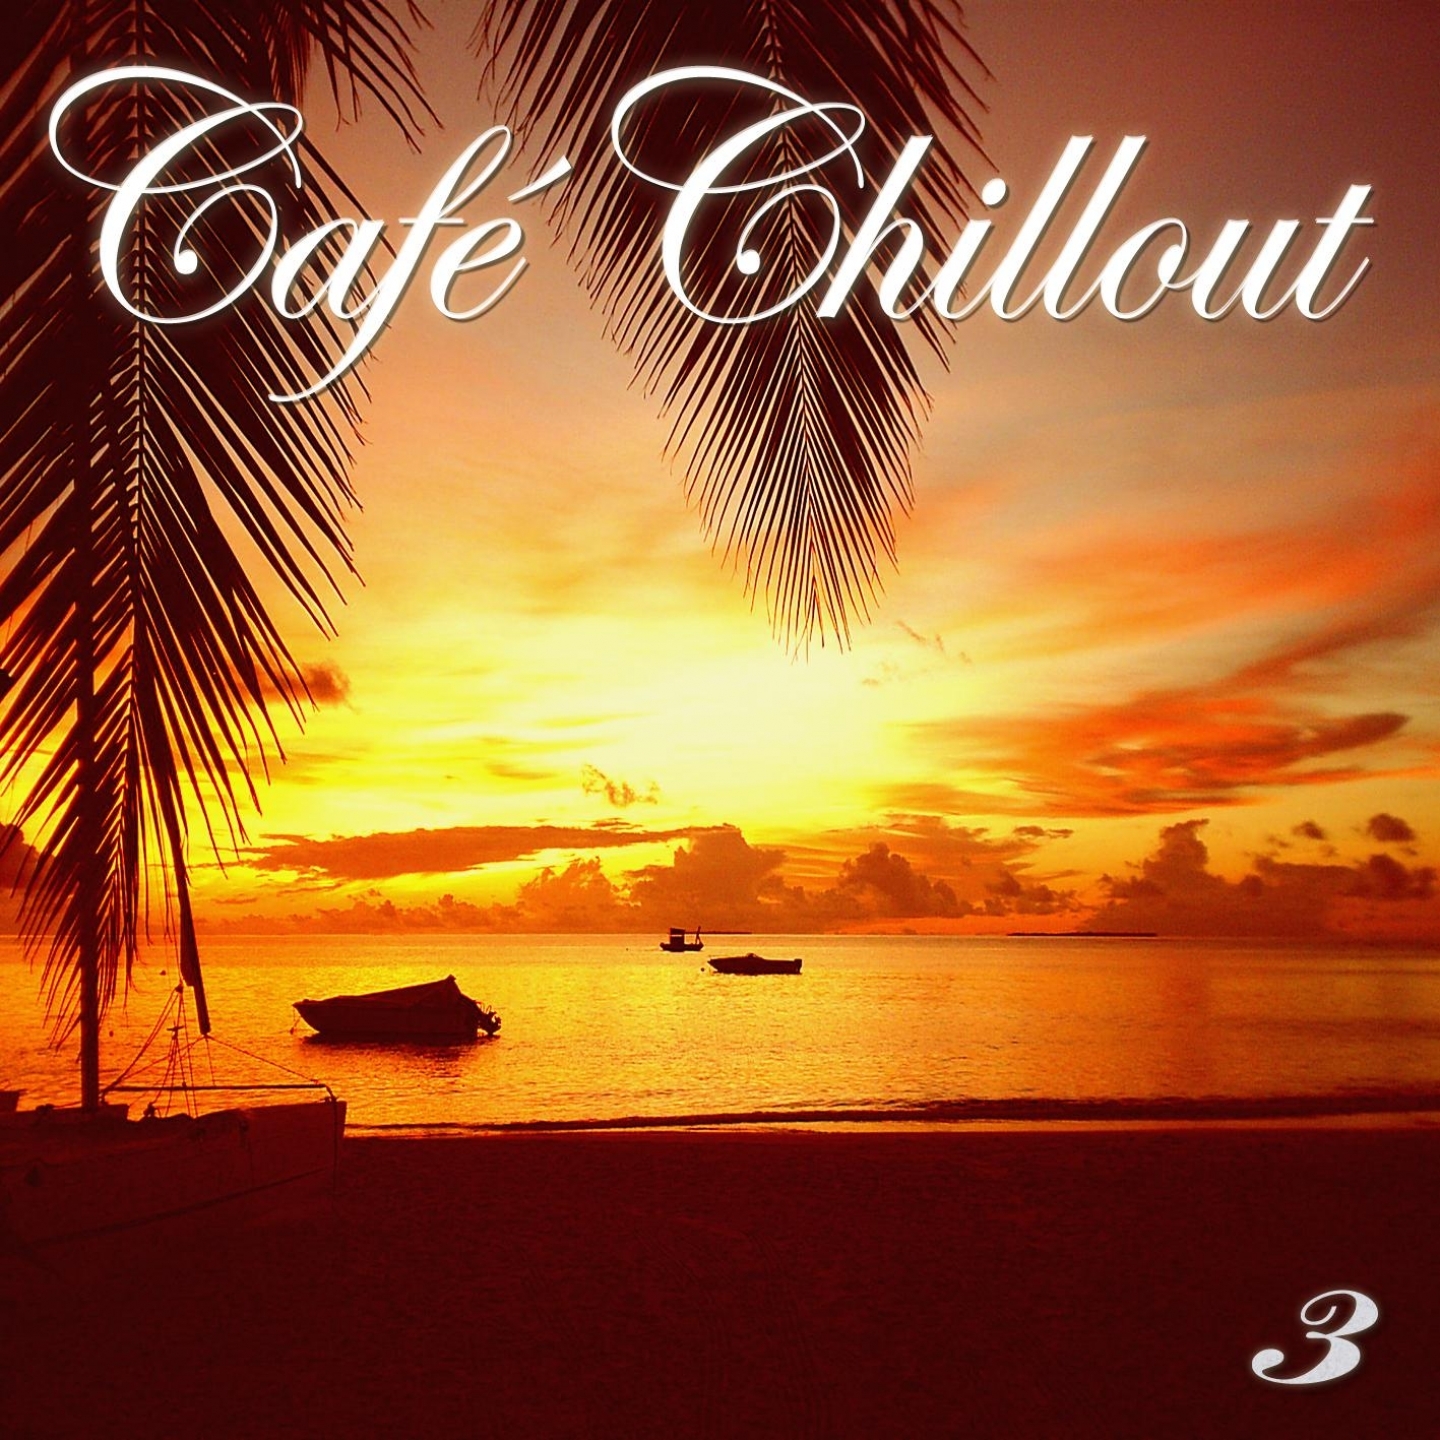 Cafe Chillout, Vol. 3